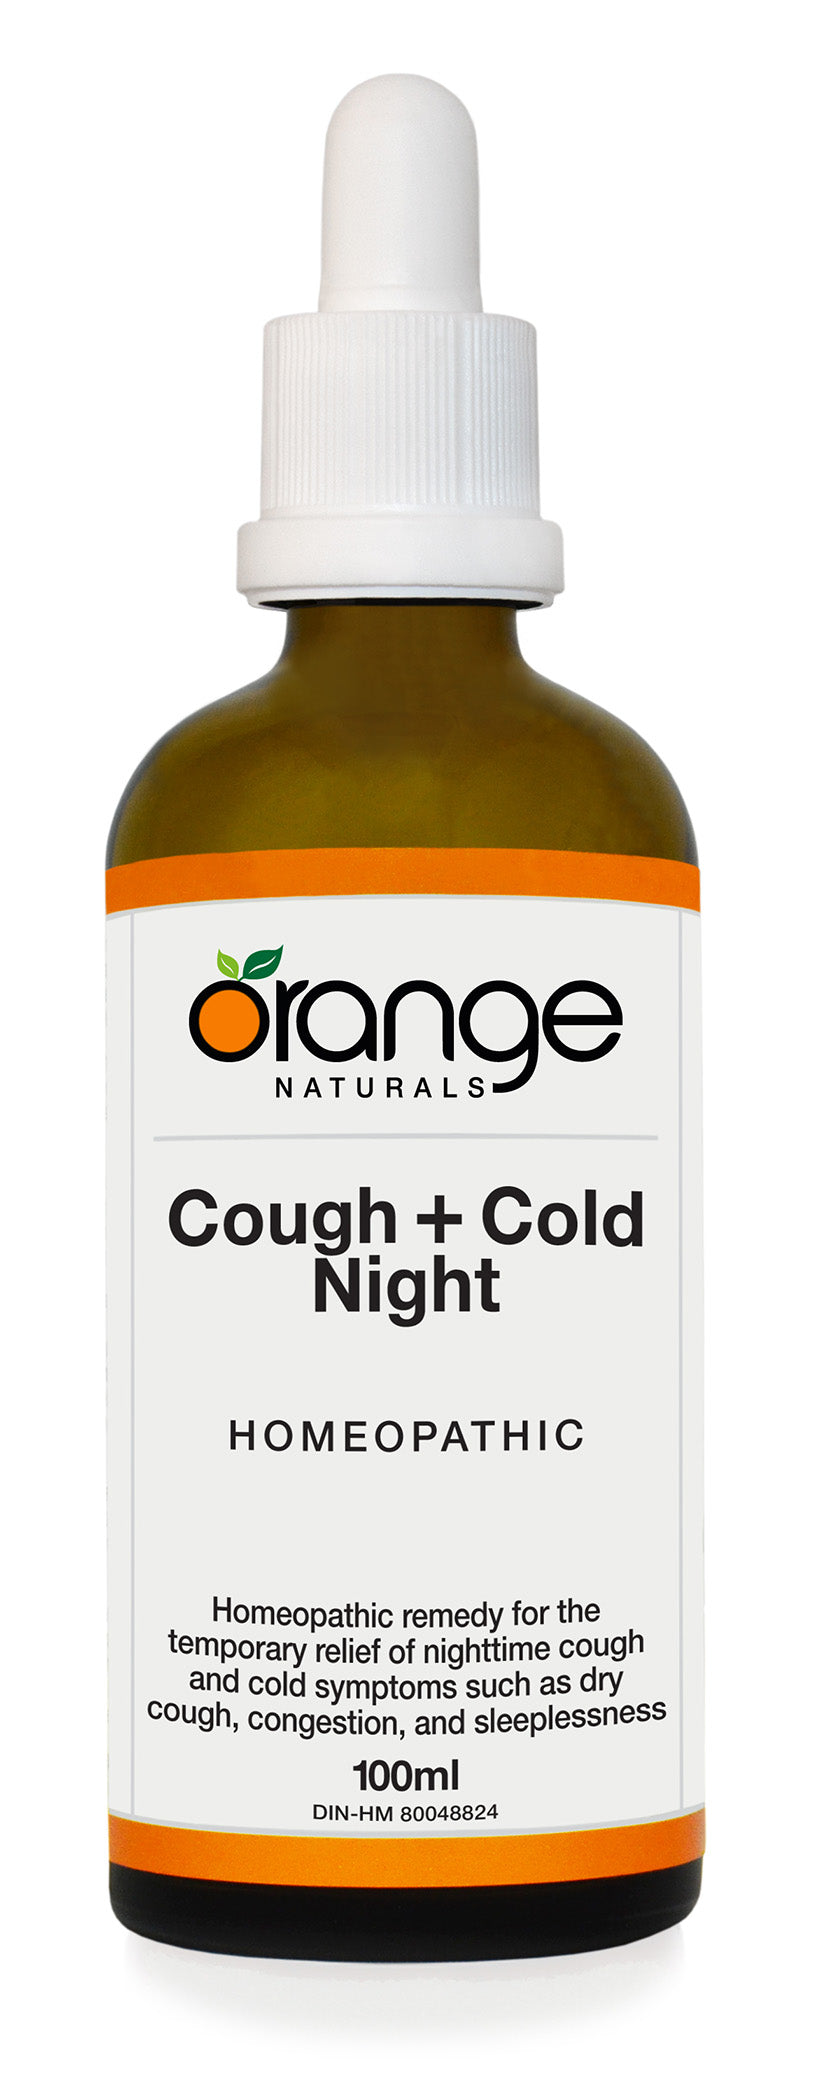 Cough+Cold Night Homeopathic